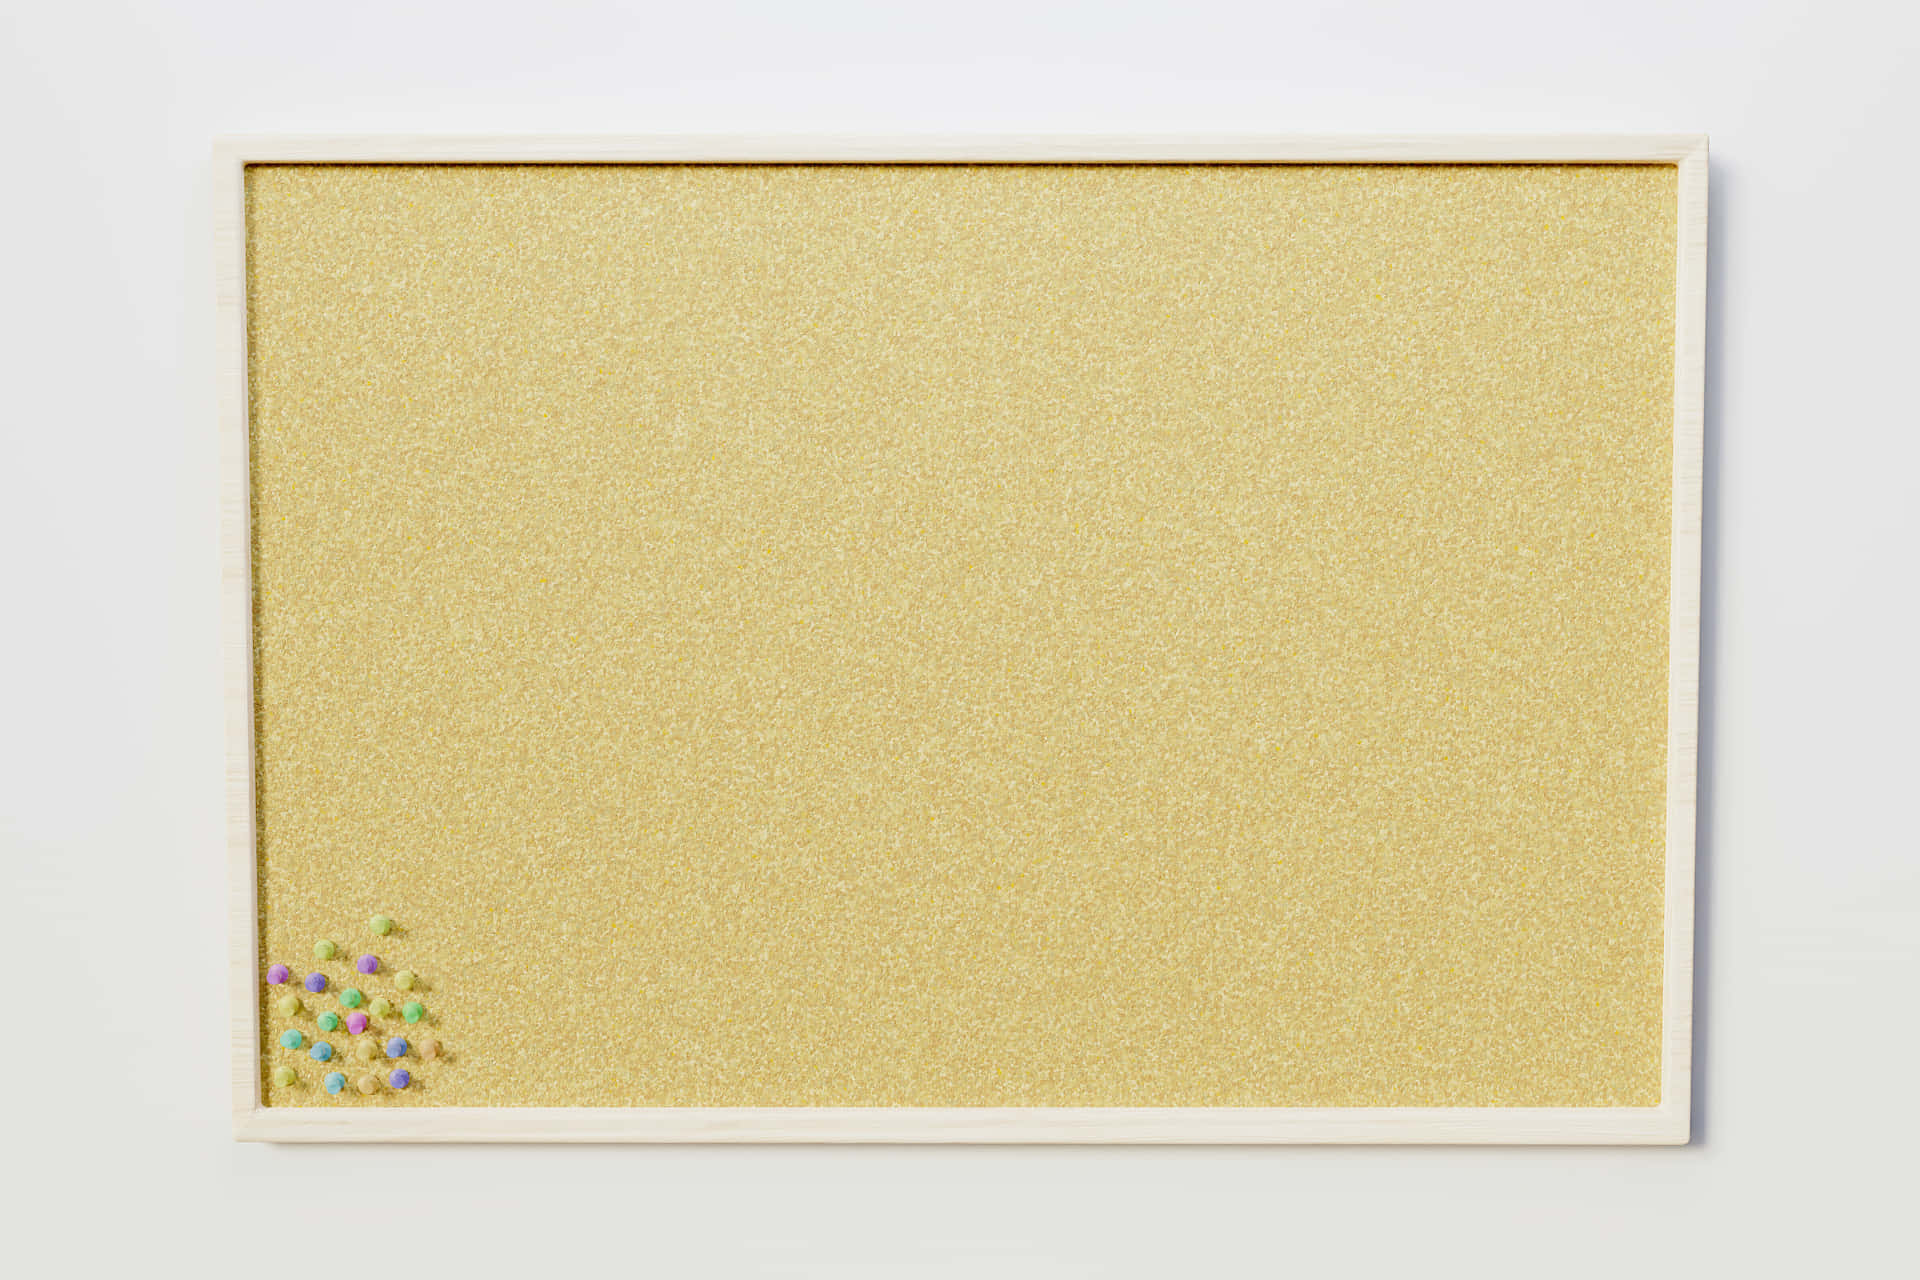 A Gold Cork Board With A White Frame And A Few Small Flowers